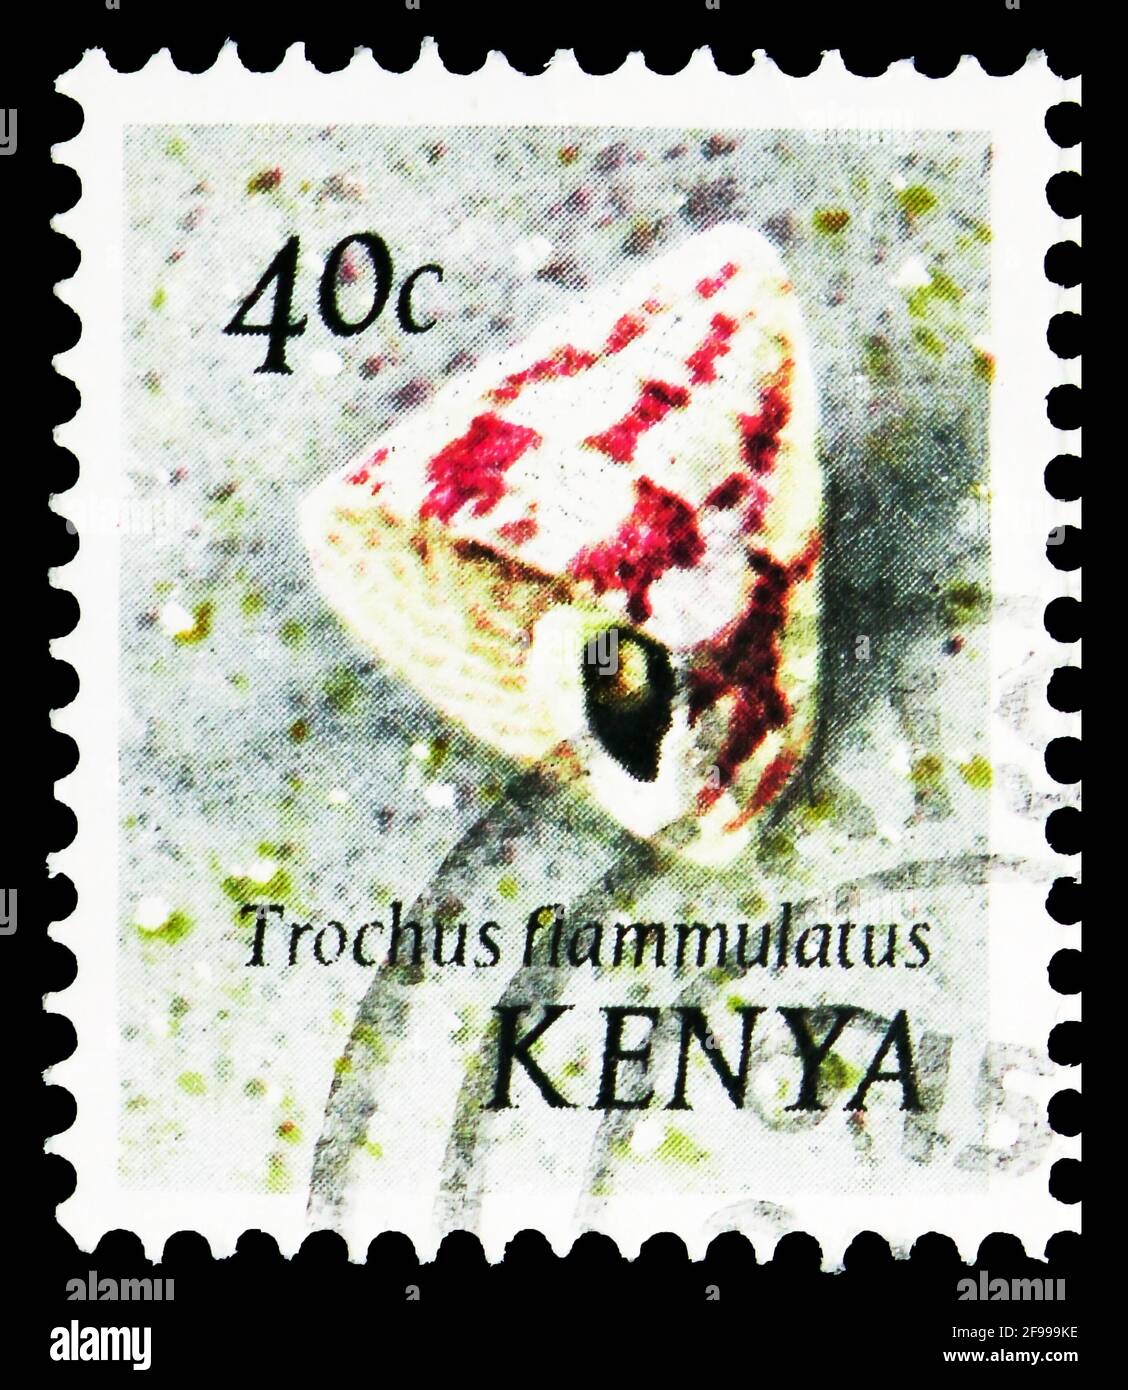 MOSCOW, RUSSIA - NOVEMBER 4, 2019: Postage stamp printed in Kenya shows Flame Top Shell (Trochus flammulatus), Molluscs of the sea serie, 40 Kenyan ce Stock Photo